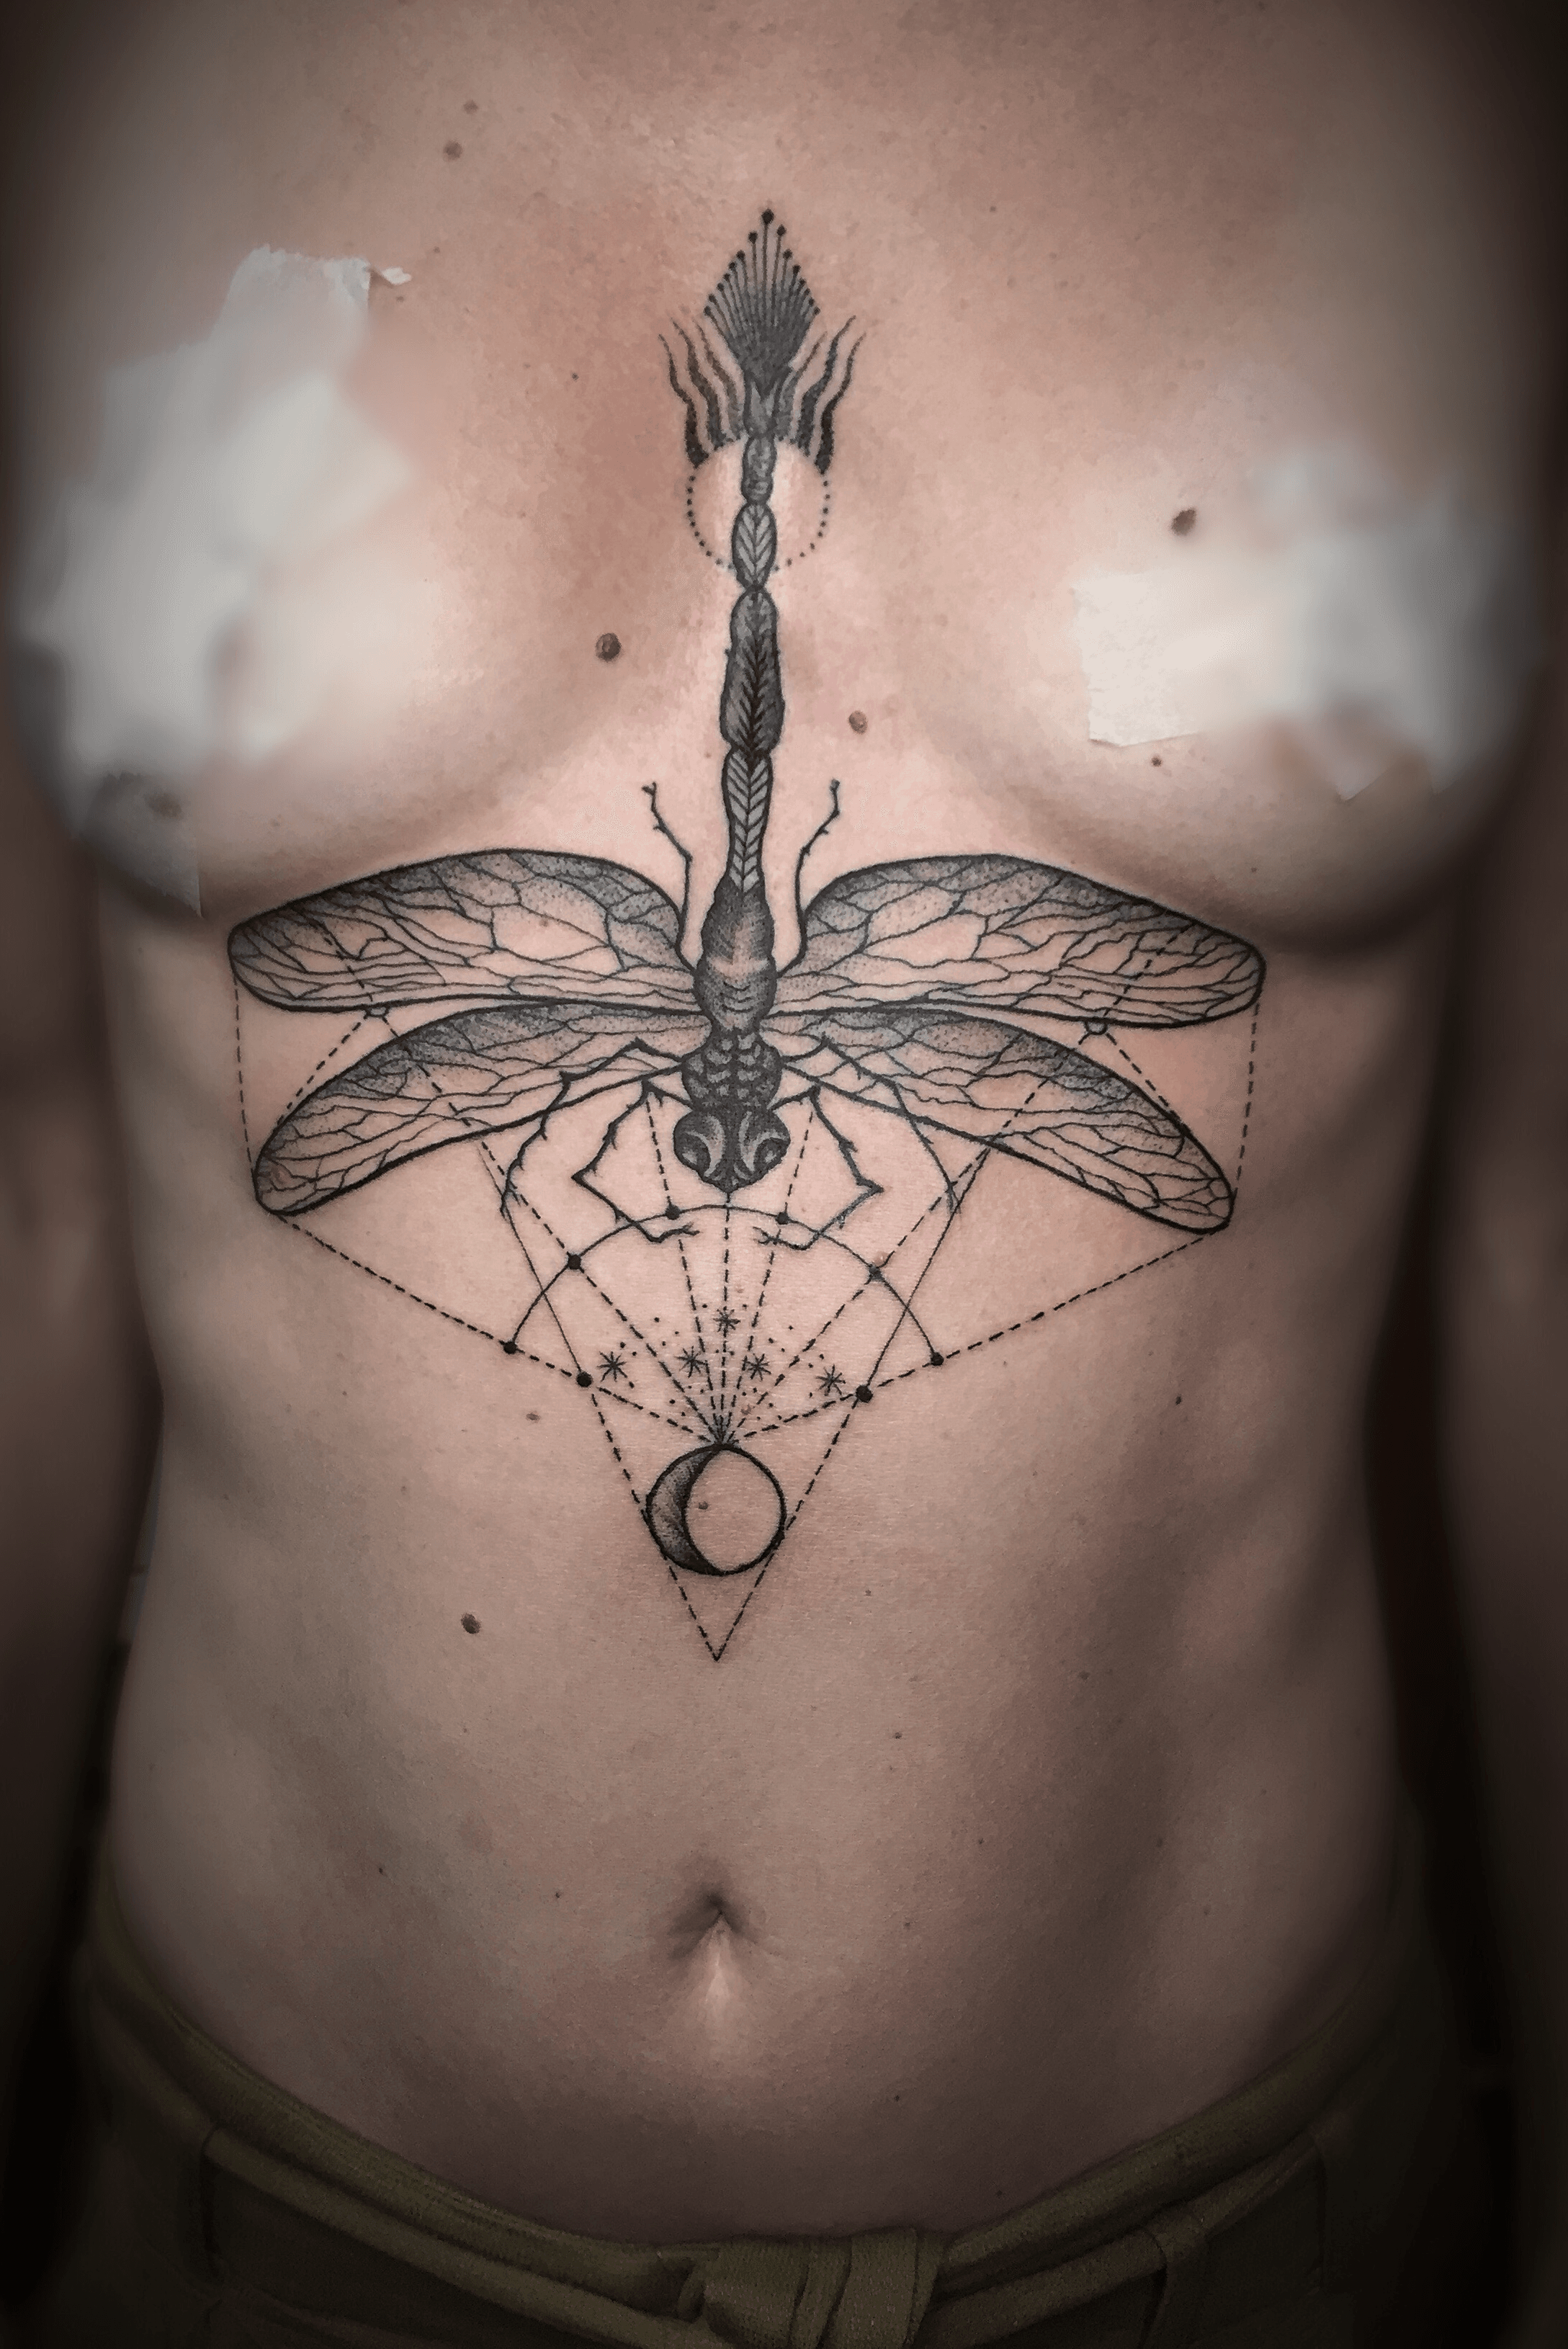 Dragonfly chest tattoo by Noksi 33 Bordeaux France  Dragonfly tattoo  Tattoos Tattoo salon